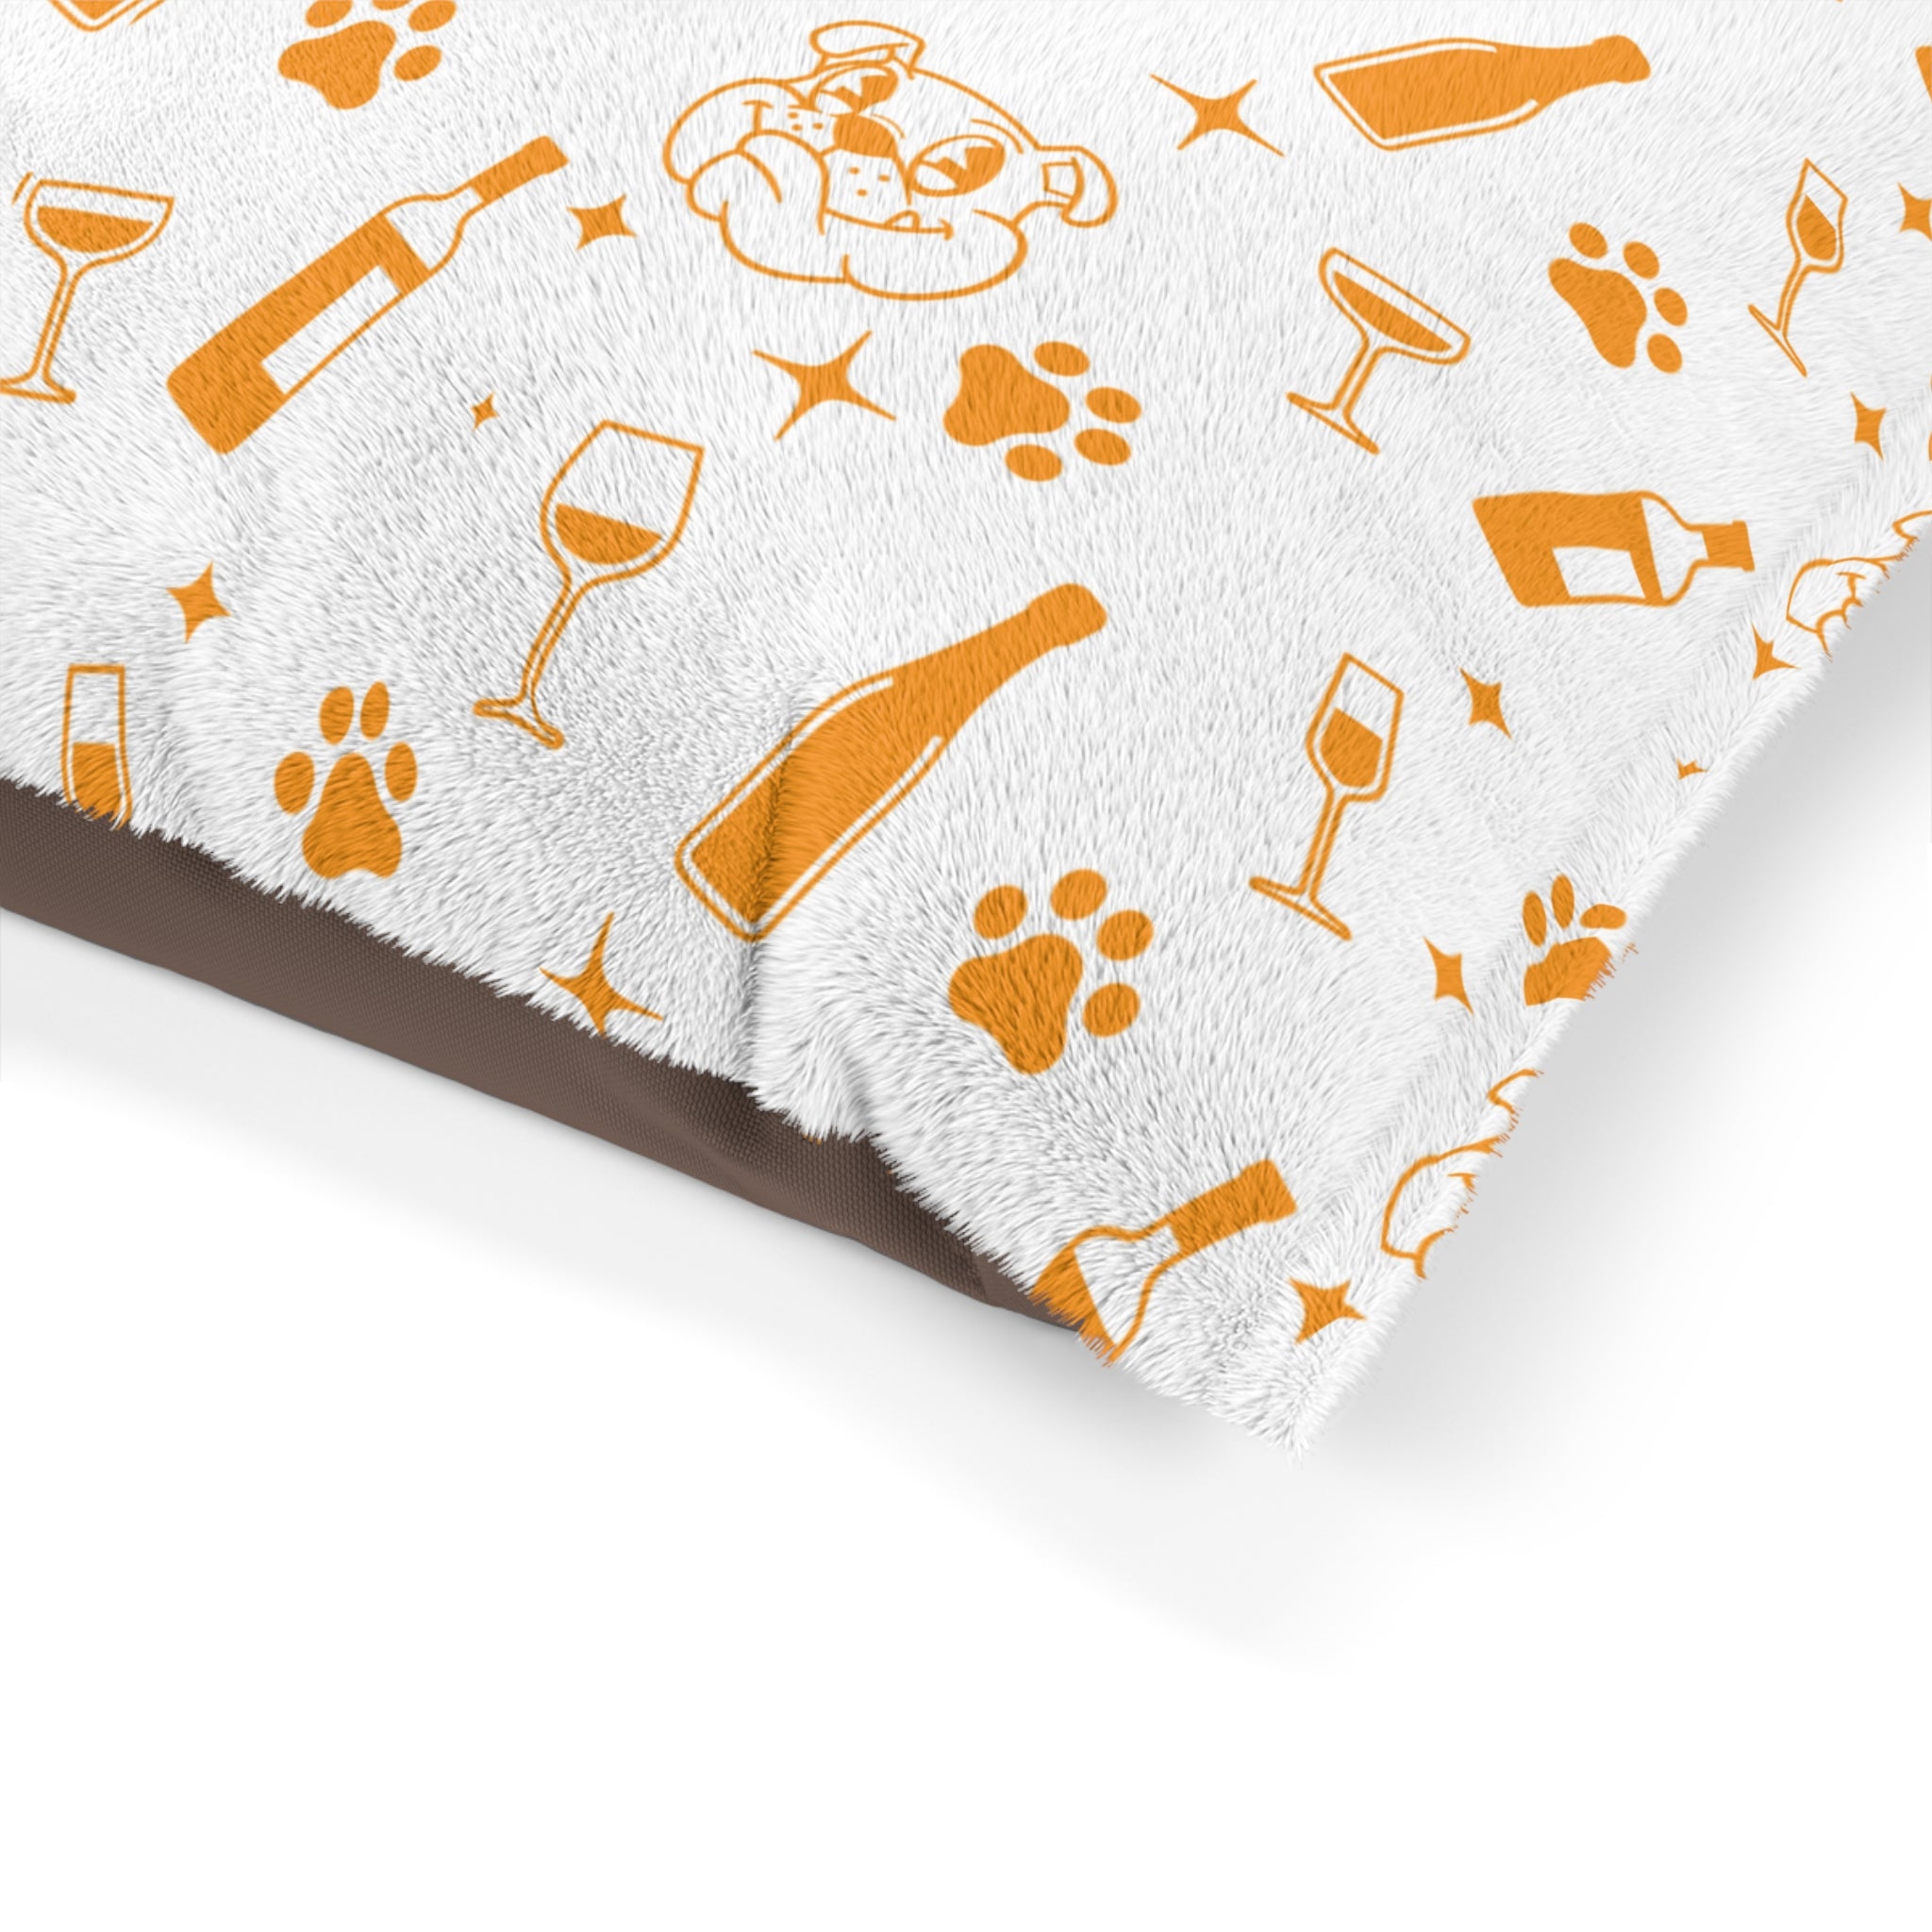 Tipsy Bully Dog Bed: Where Dreams of Wine and Woofs Collide! - Orange